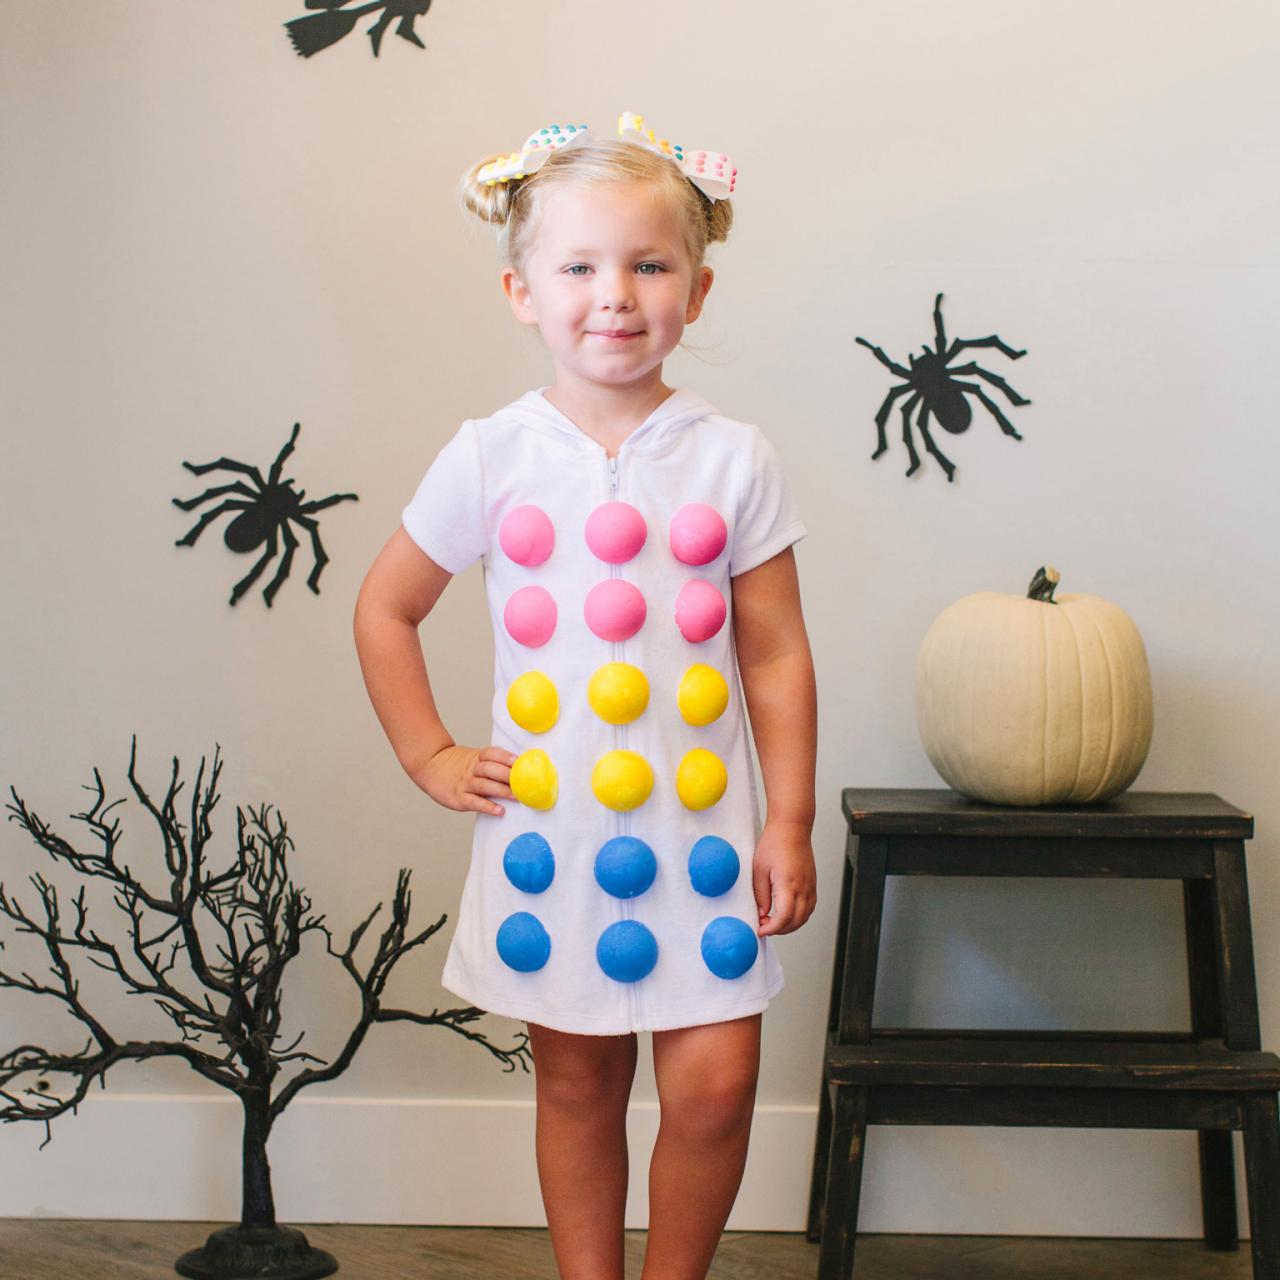 Halloween Costume Favorite Candy Suit Pop Chips Costume of the 